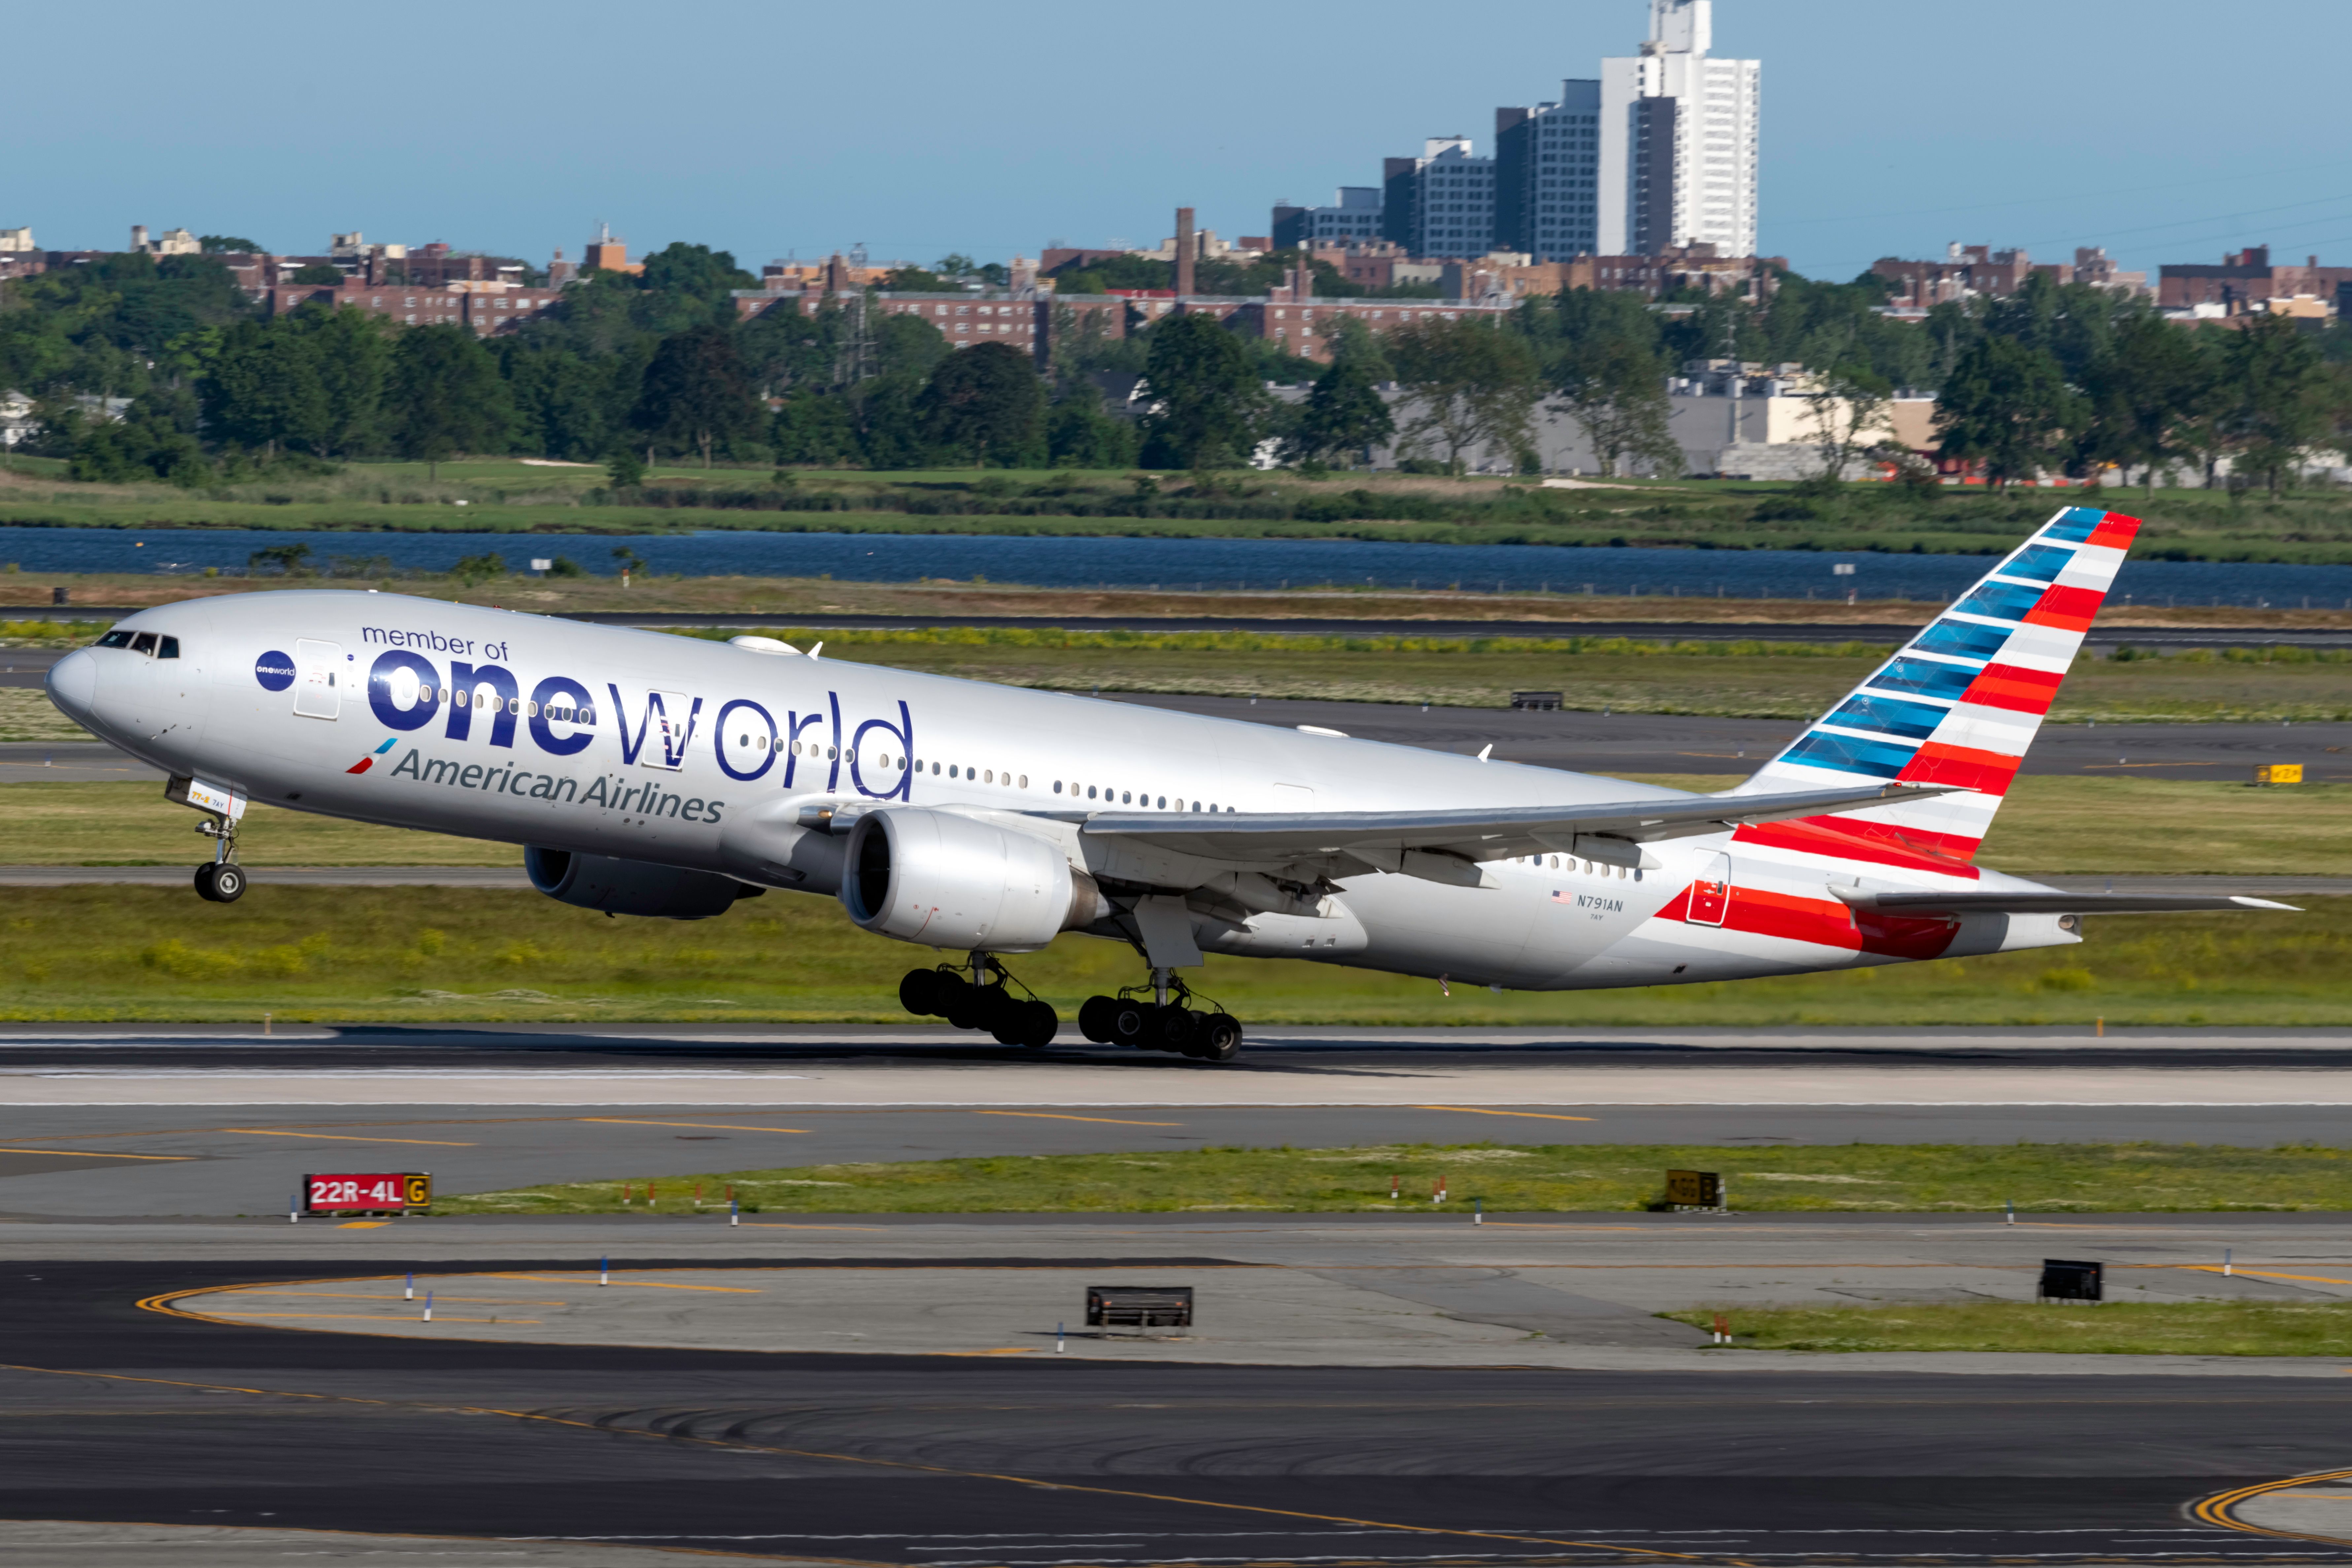 An American Airlines Boeing 777 in Oneworld Livery taking off.